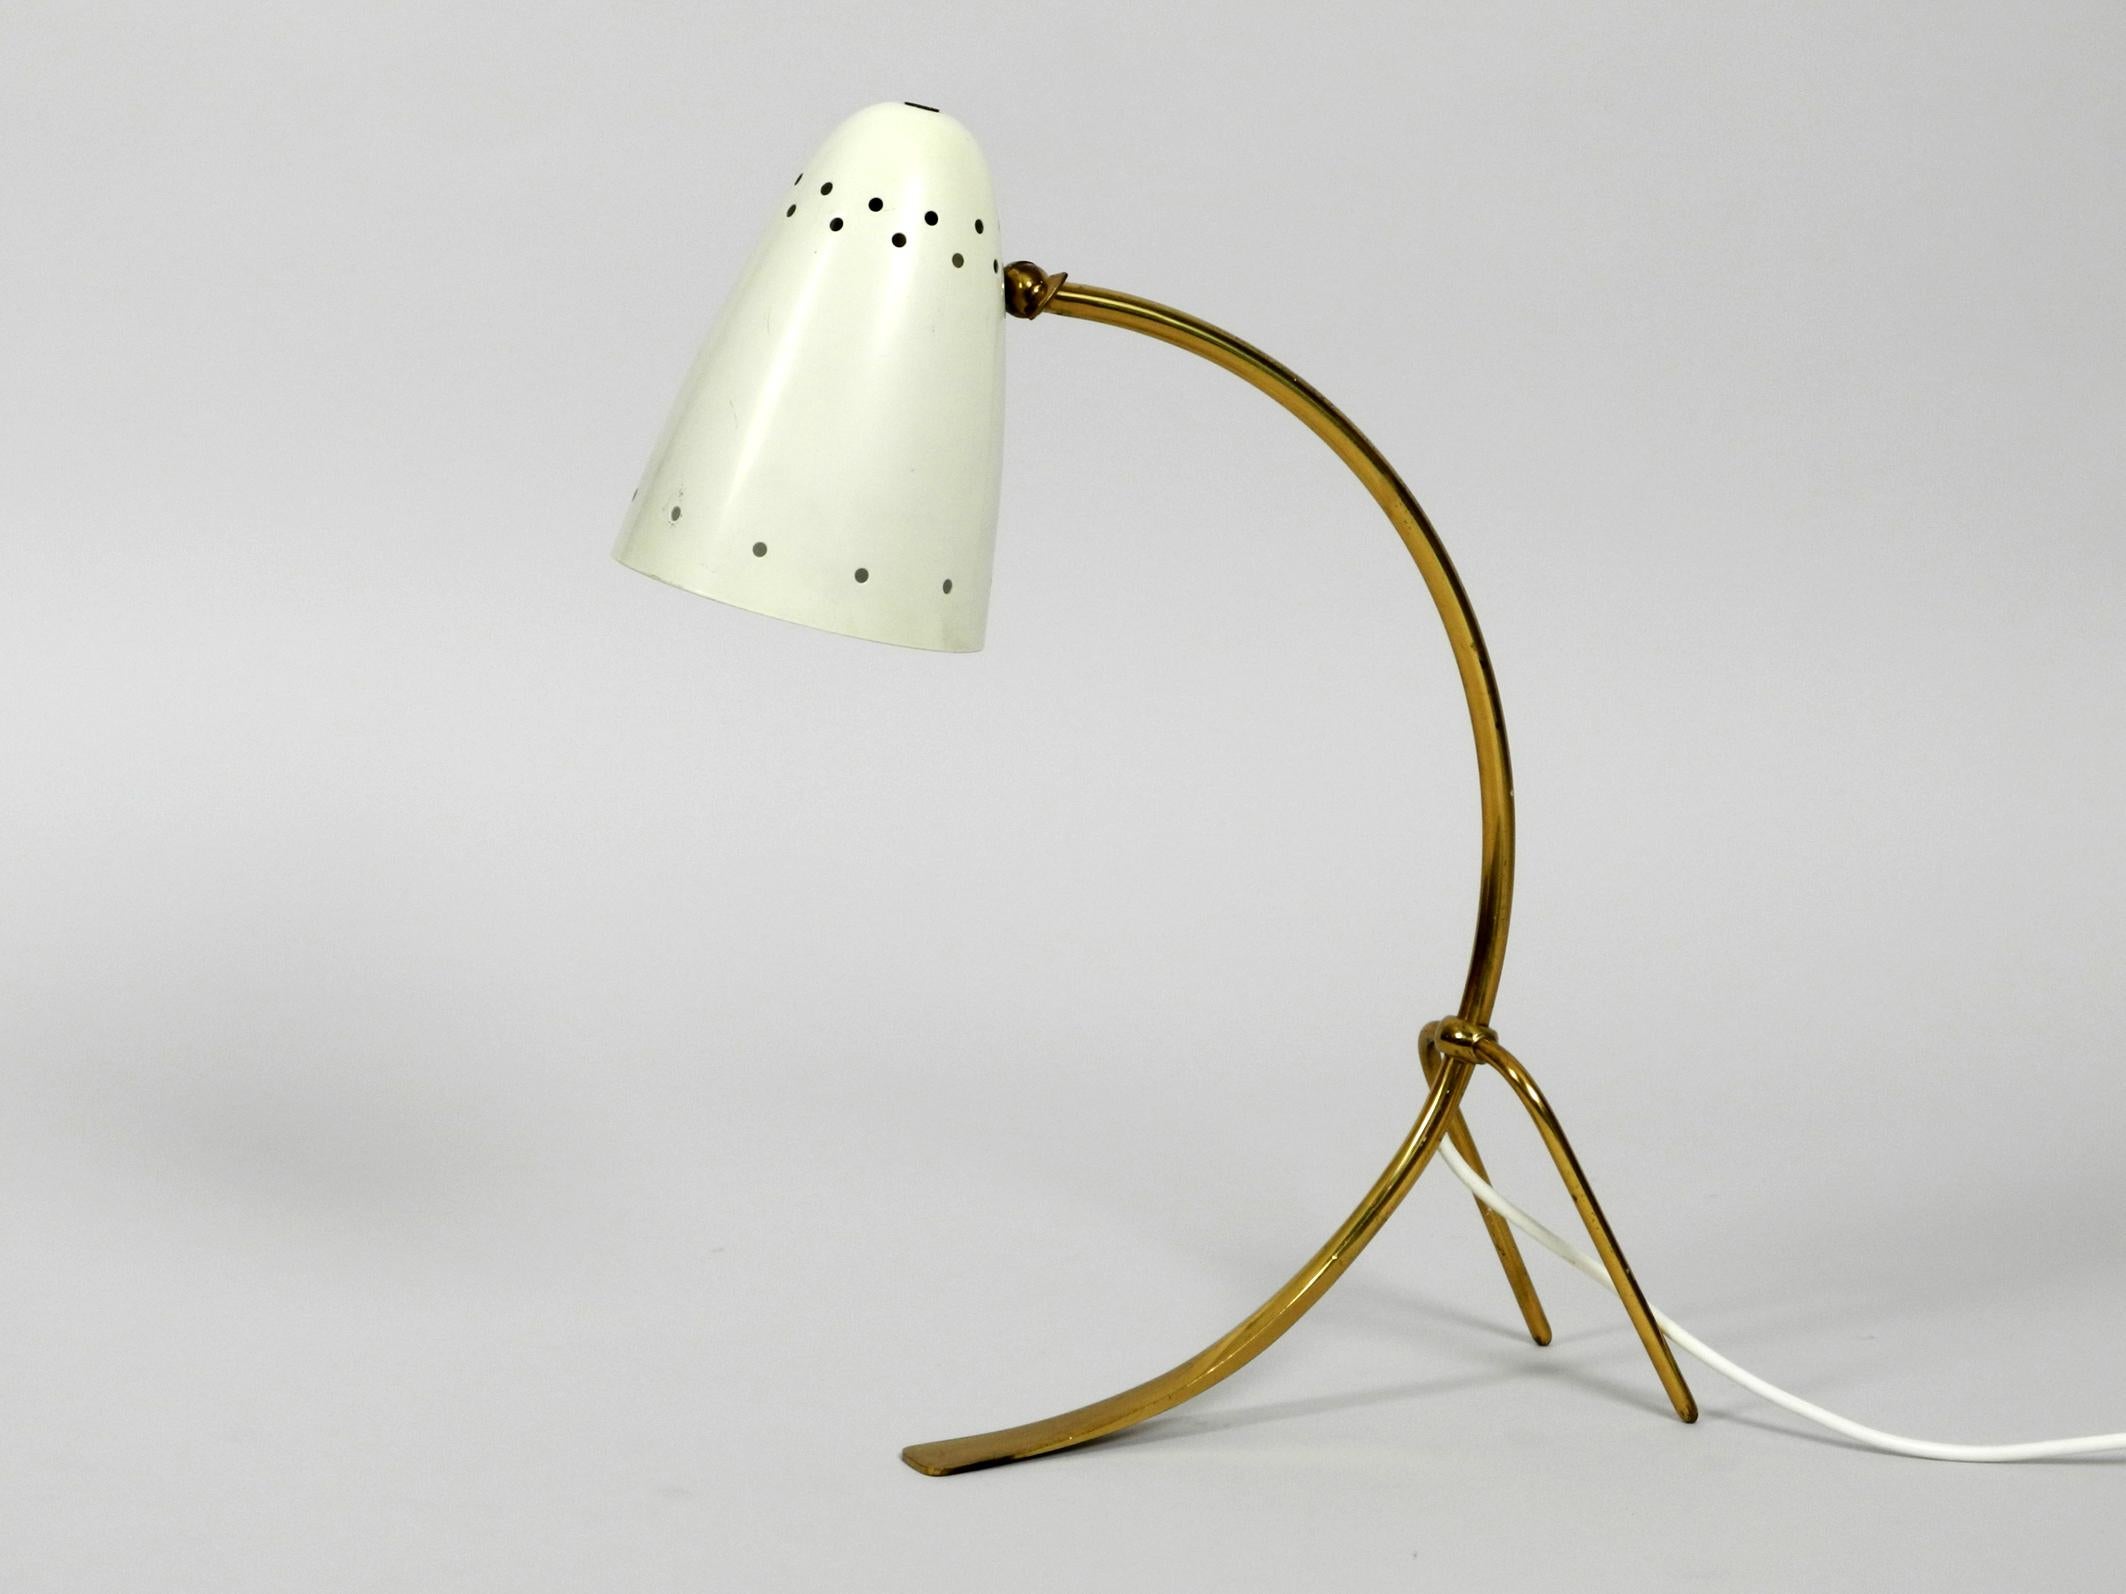 Very large midcentury brass metal table lamp. Made by J. T. Kalmar Vienna.
Made in Austria. Very nice design with many details, shade steplessly adjustable.
Slight scratches on the shade. Well to see at the photos.
Has been rewired due to